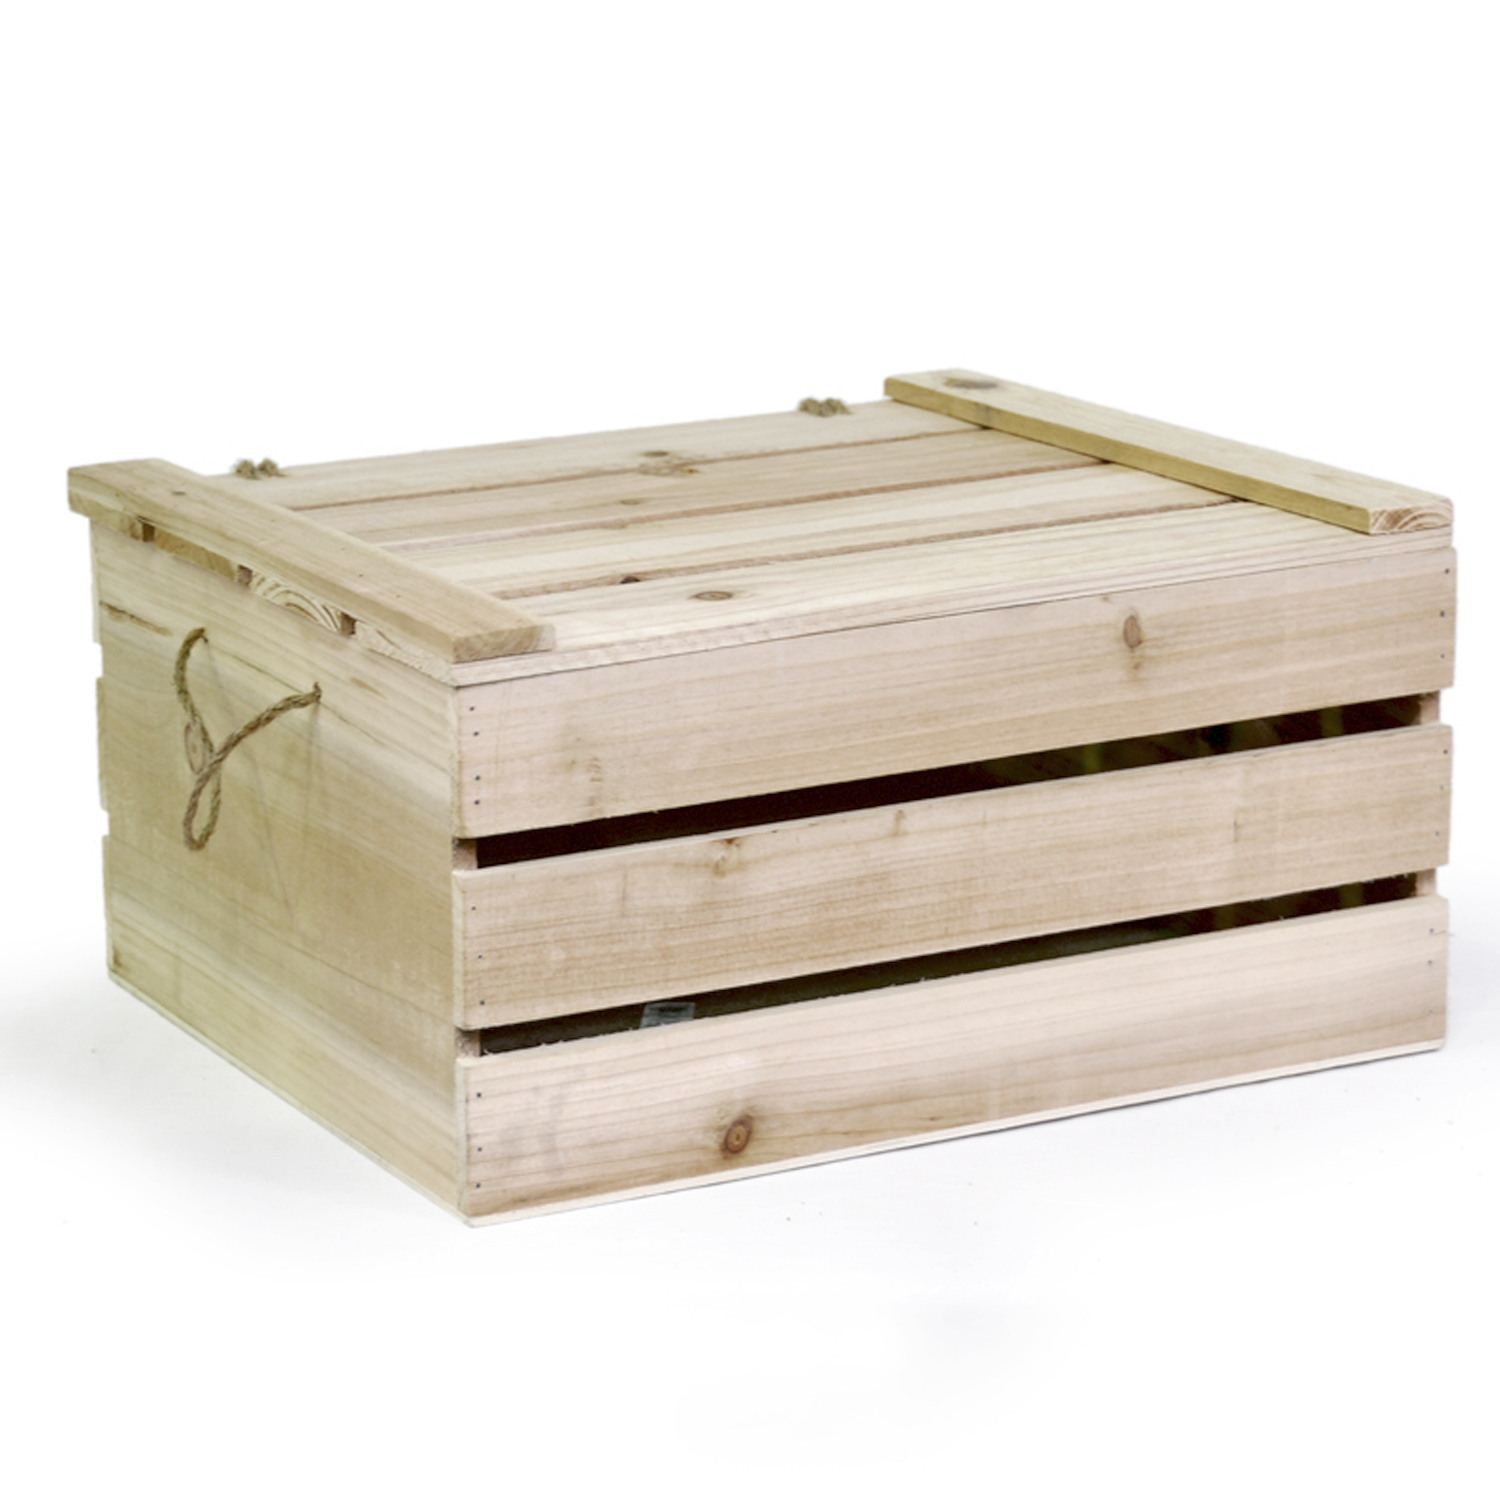 Natural Wooden Storage Box with Lid - Large The Lucky Clover Trading Co.